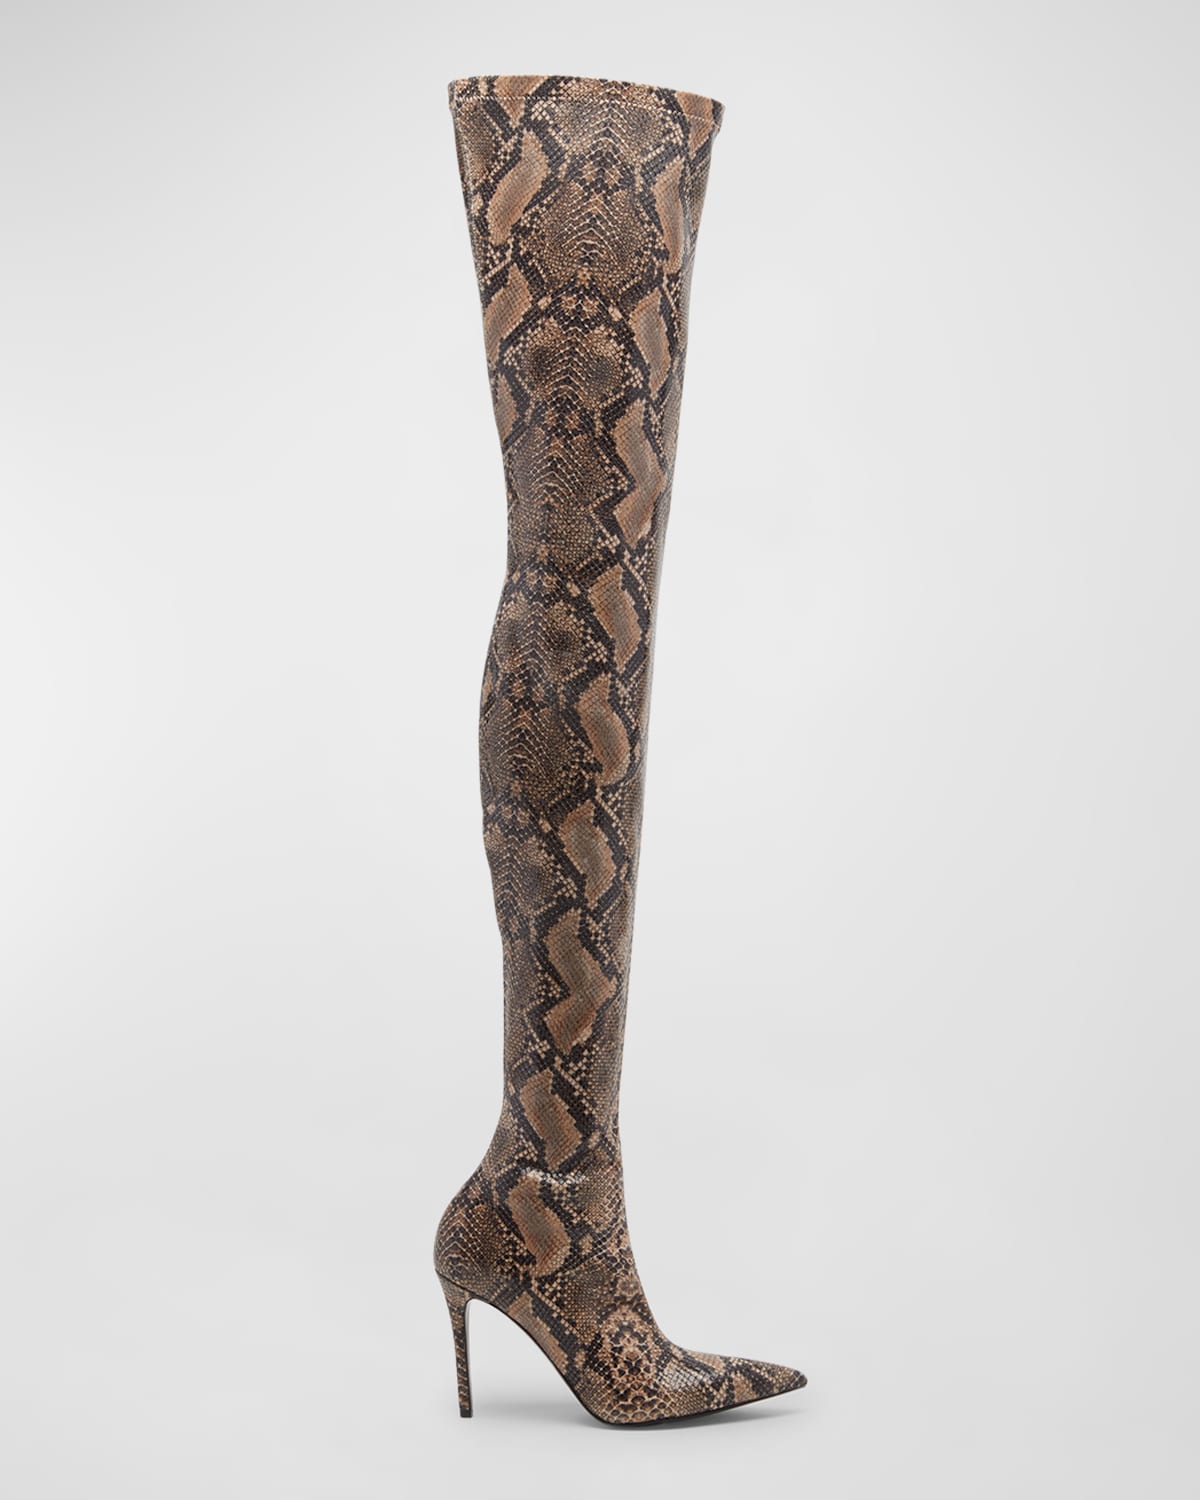 STELLA MCCARTNEY STELLA ICONIC RECYCLED SNAKE-PRINT OVER-THE-KNEE BOOTS